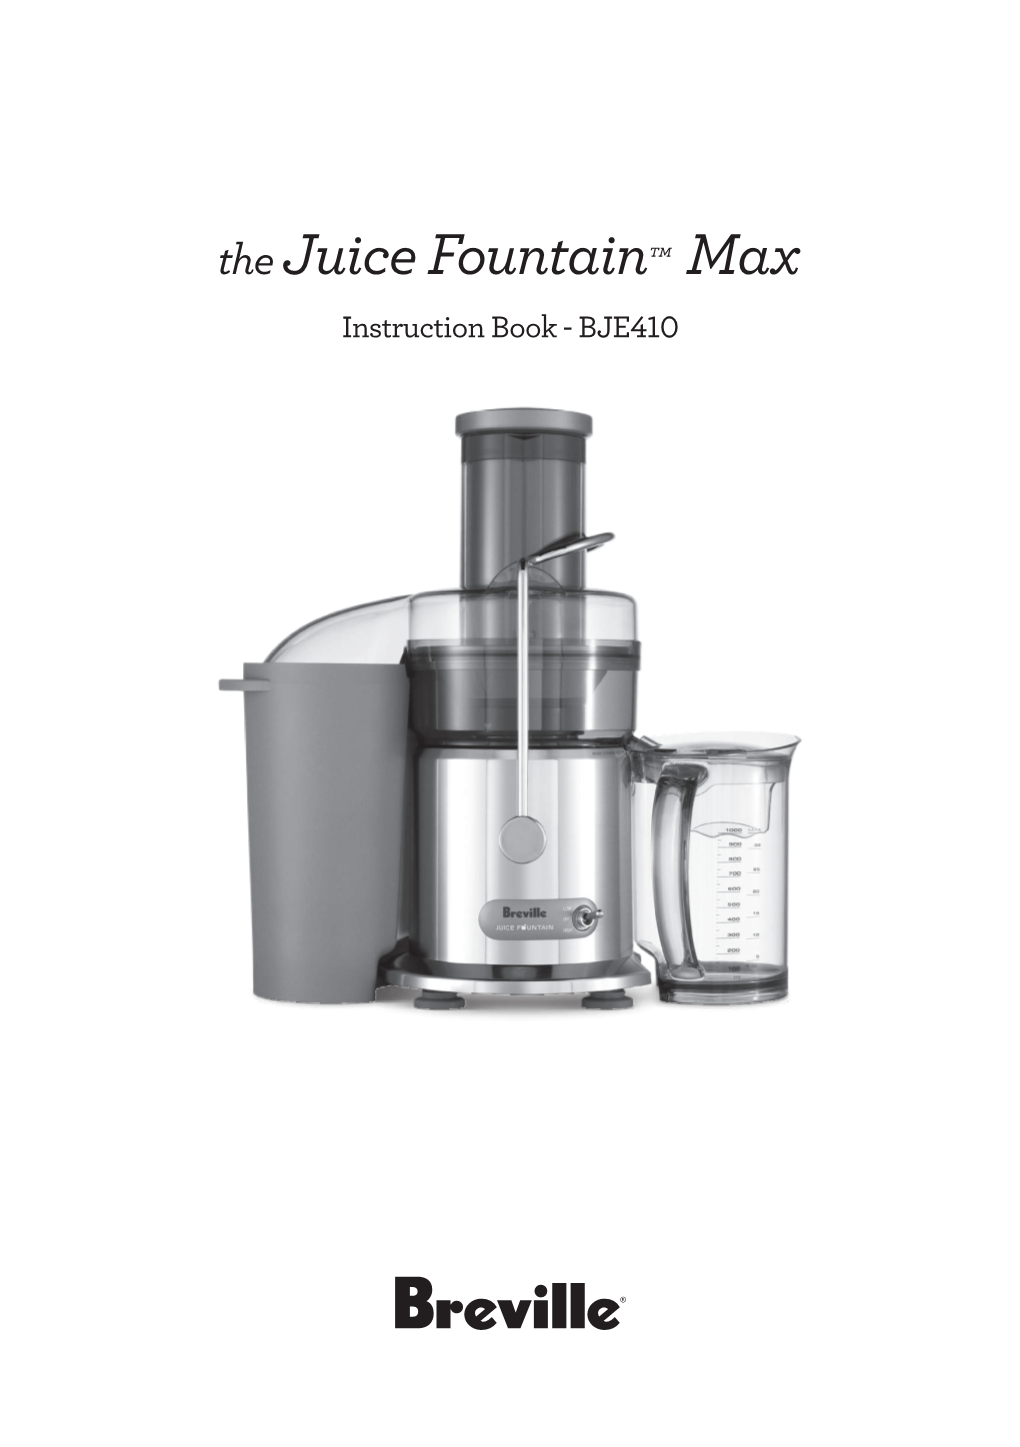 The Juice Fountain™ Max Instruction Book - BJE410 IMPORTANT Contents SAFEGUARDS